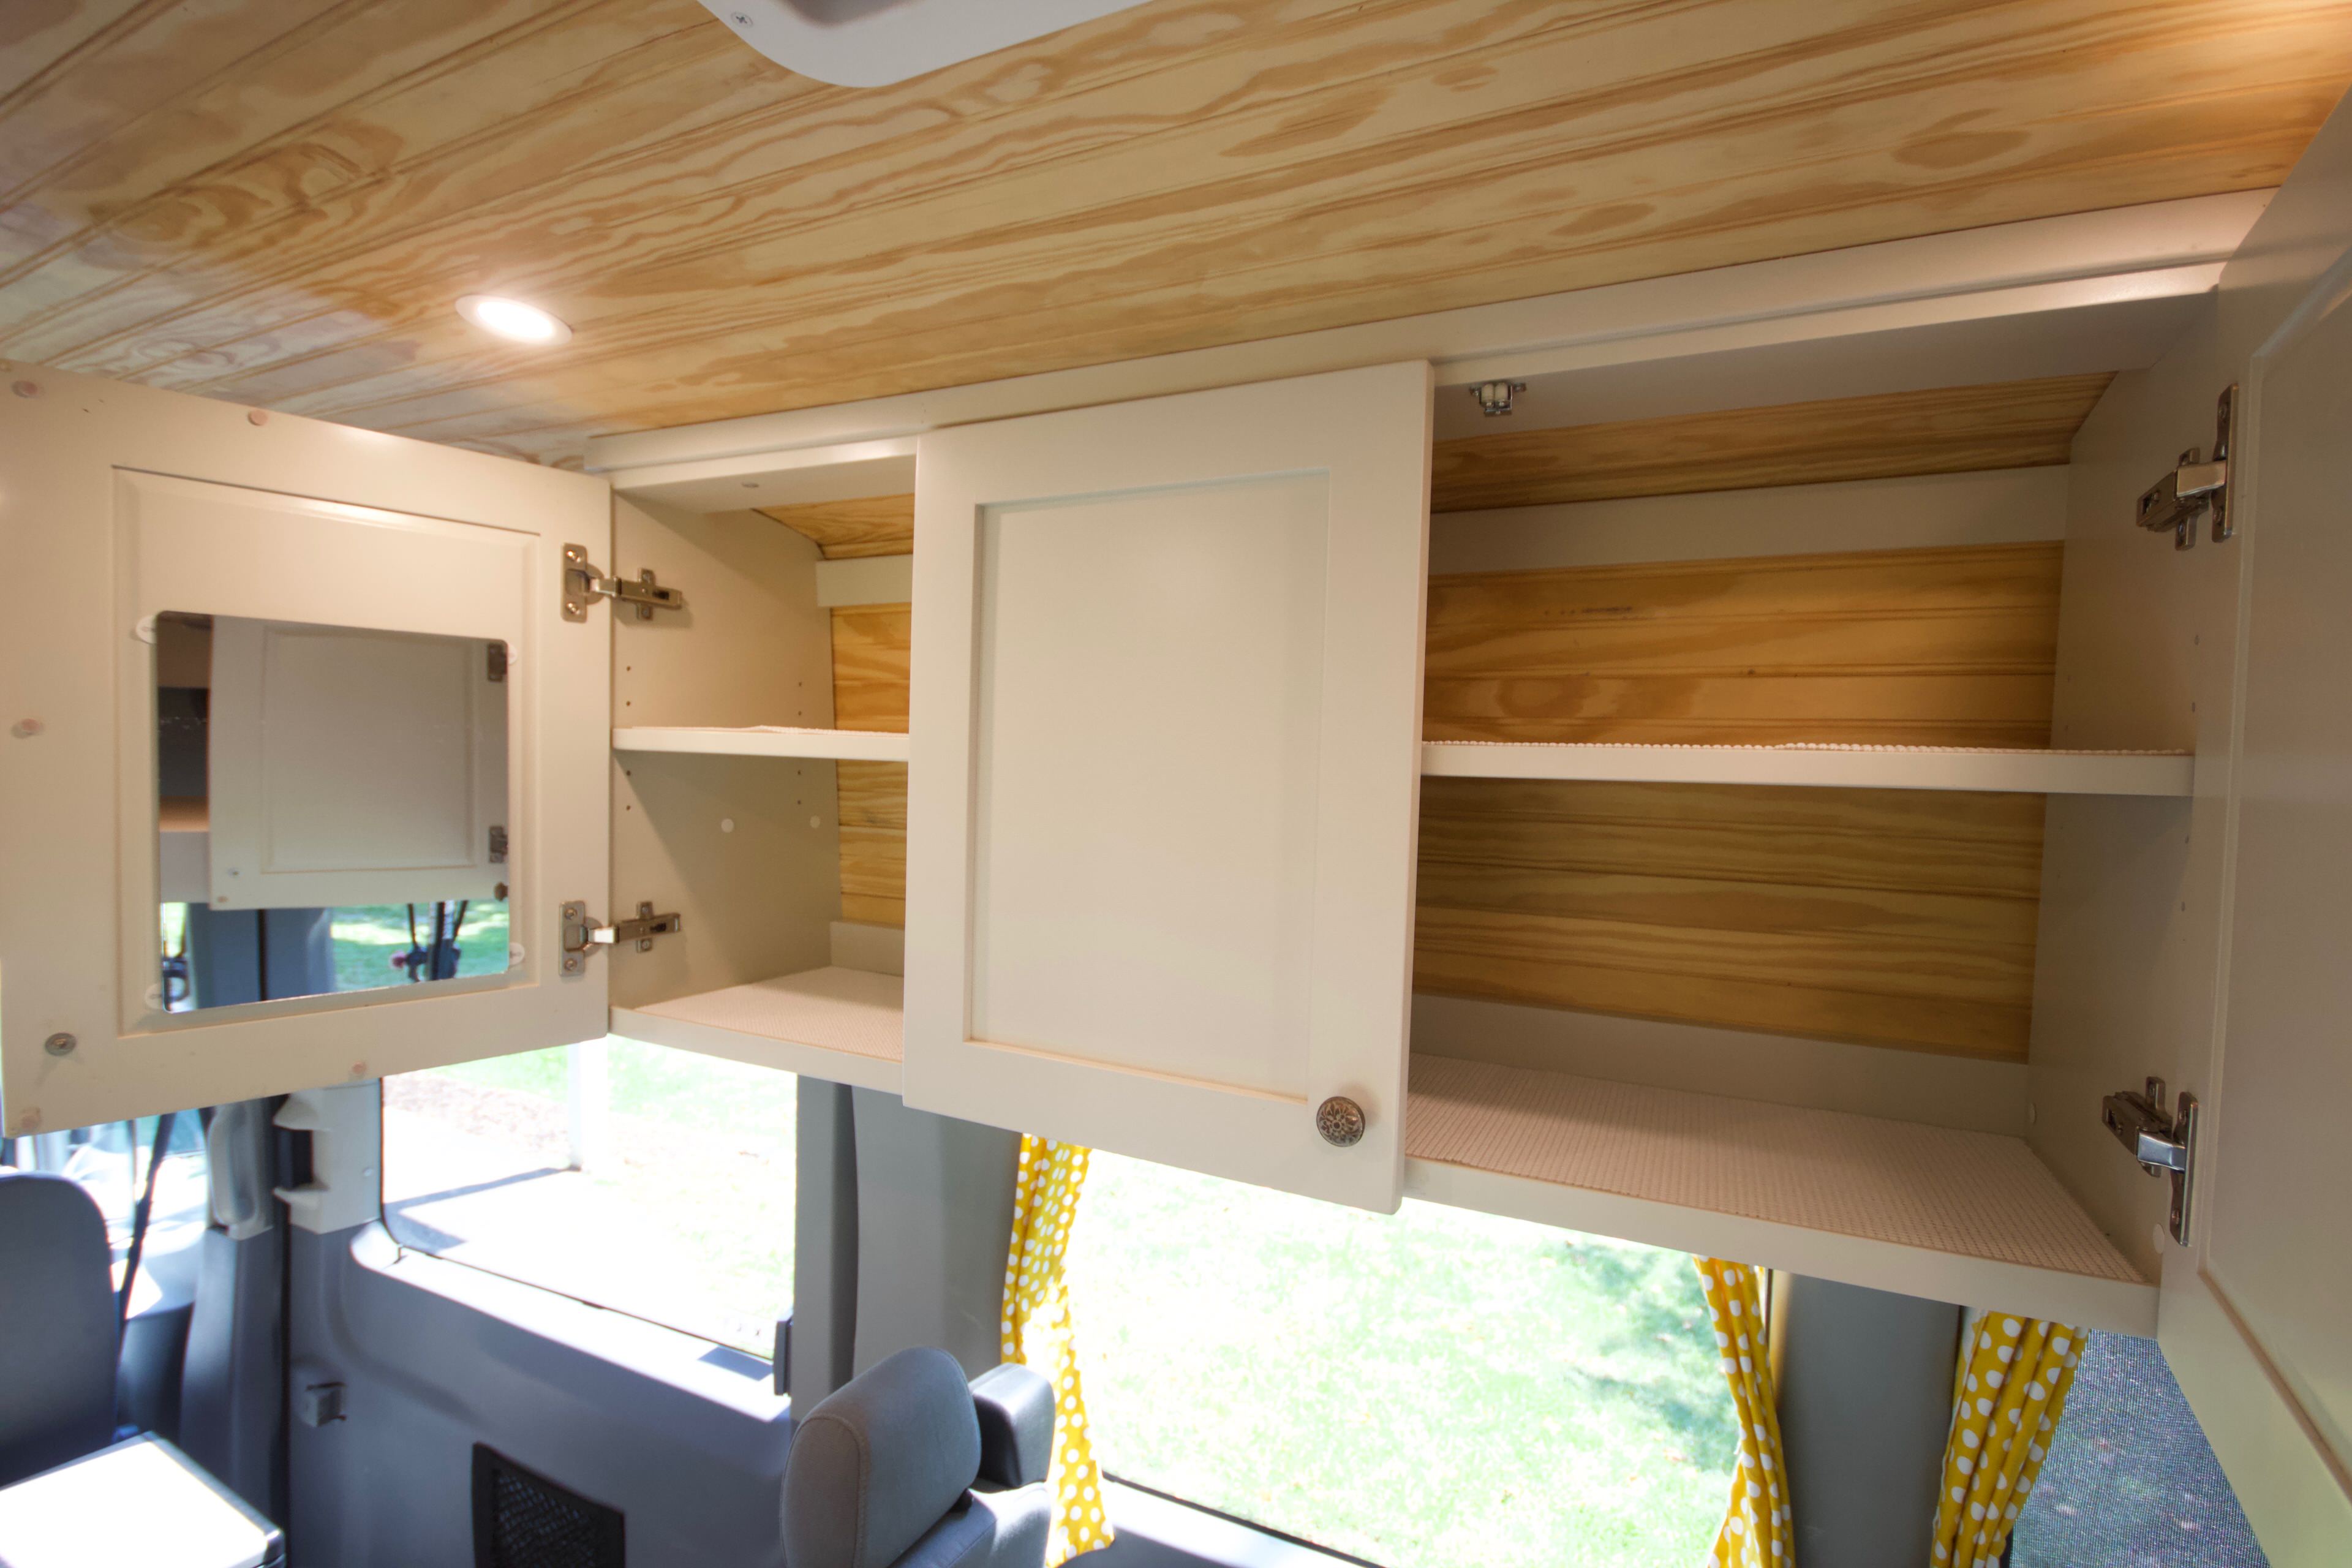 Upper custom cabinets with adjustable shelving